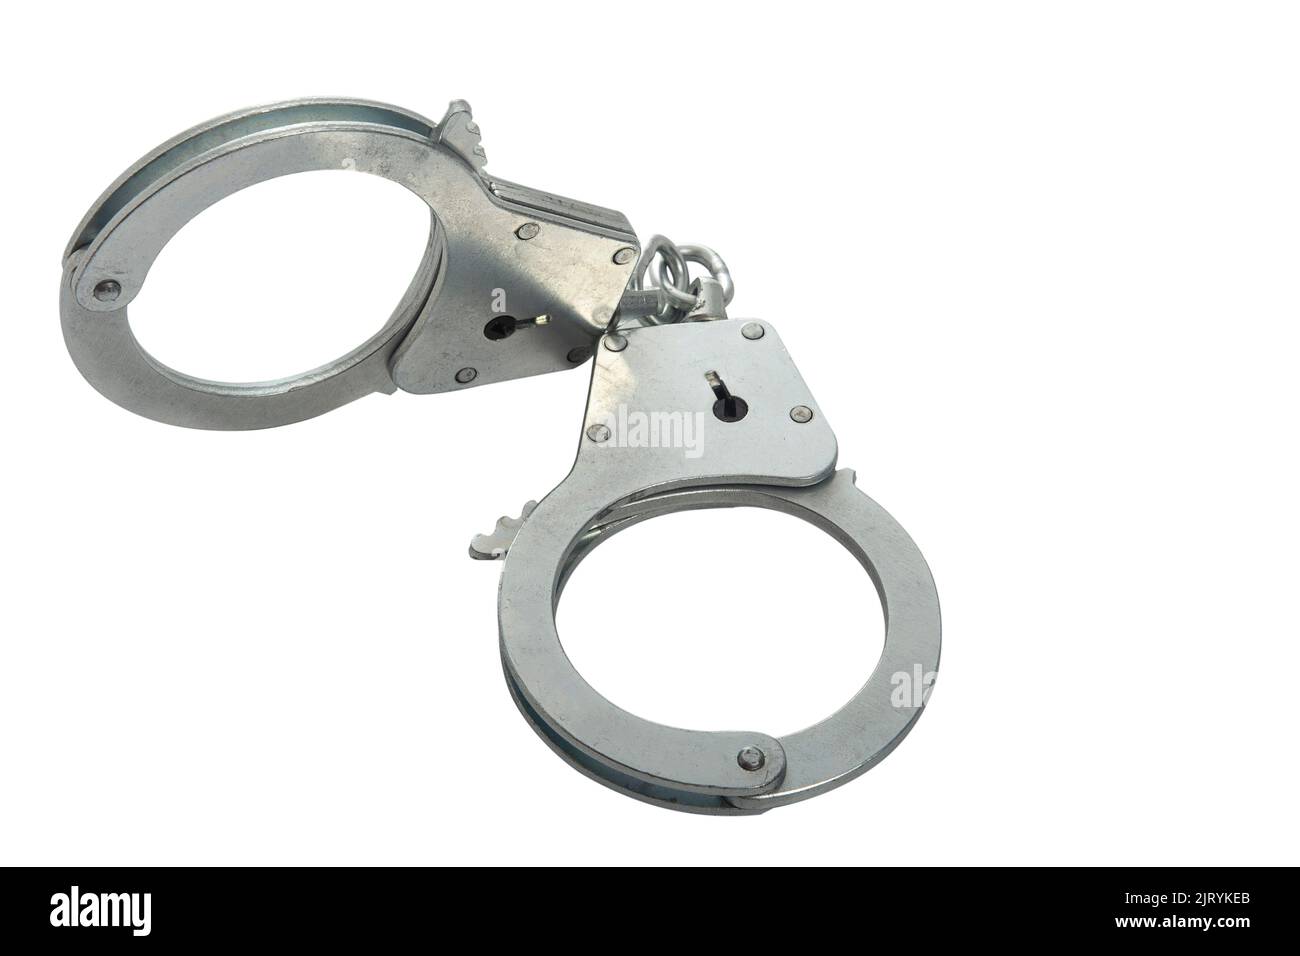 Metal handcuffs on a white isolated background, copy space Stock Photo